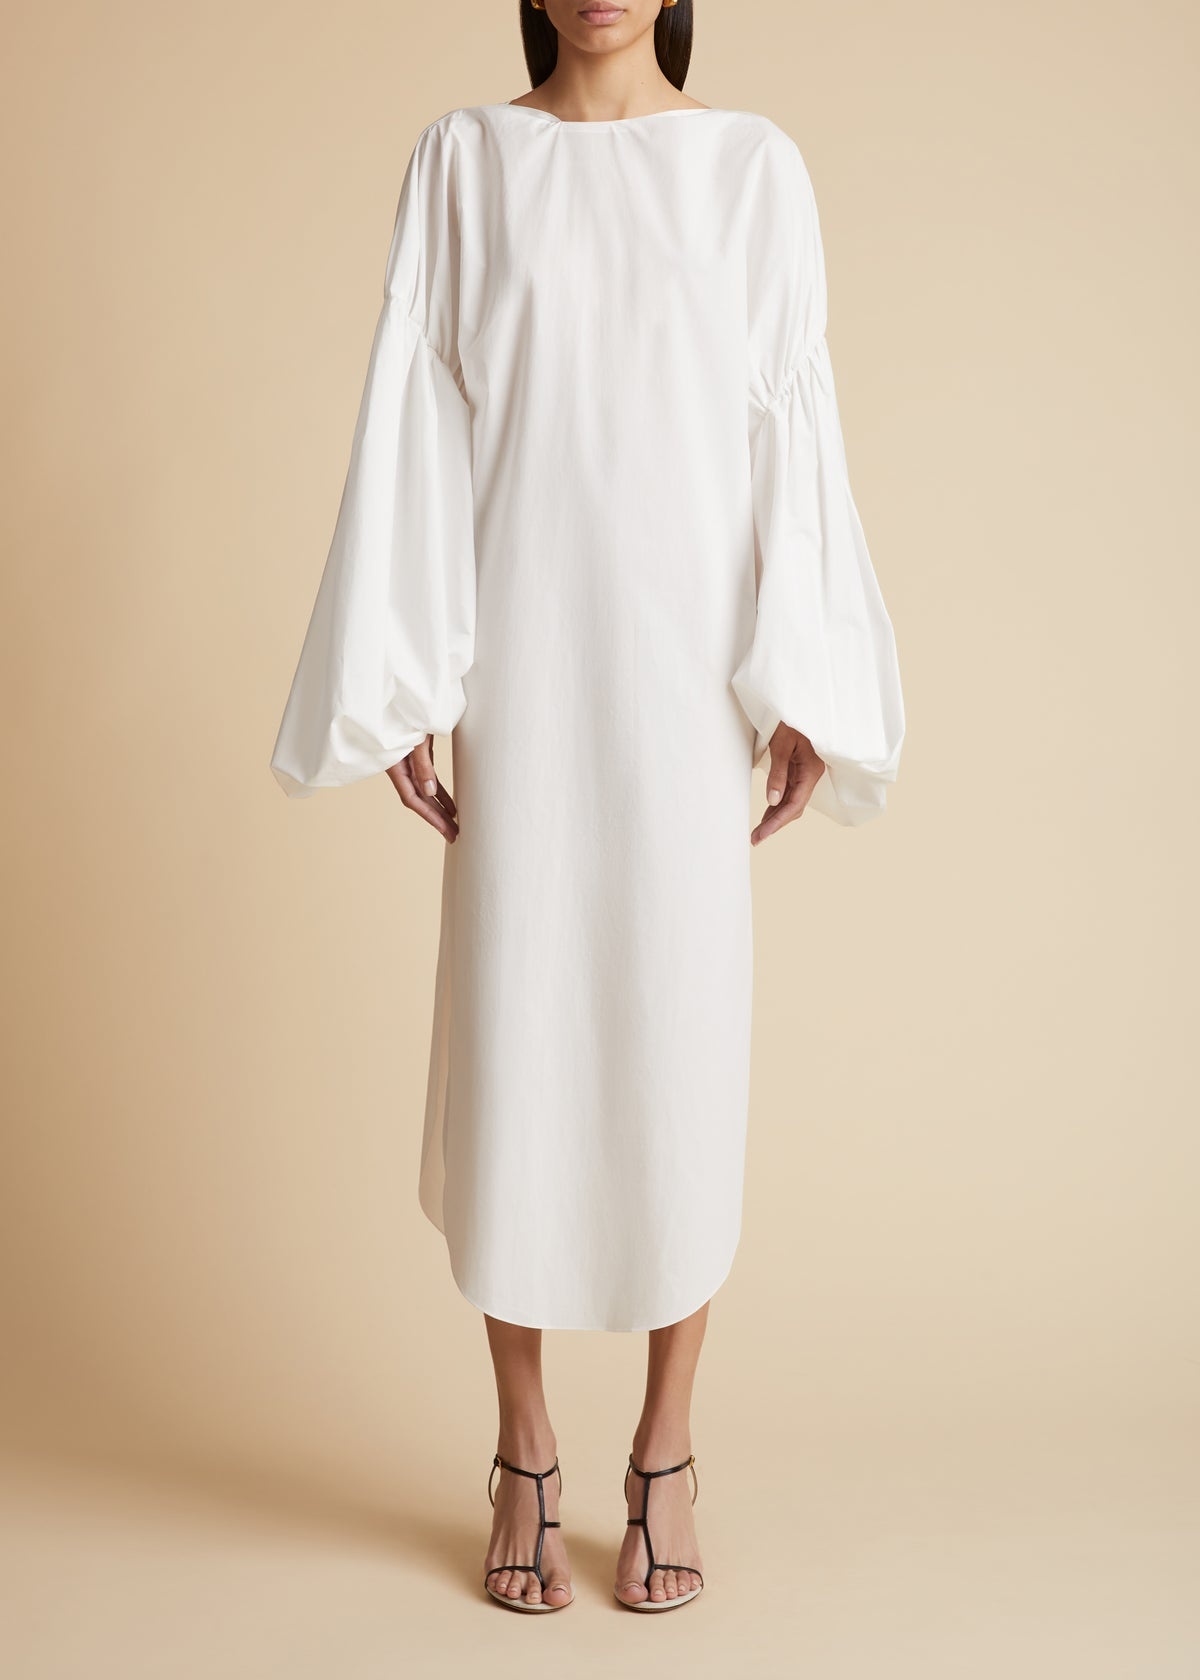 The Zelma Dress in White - 2